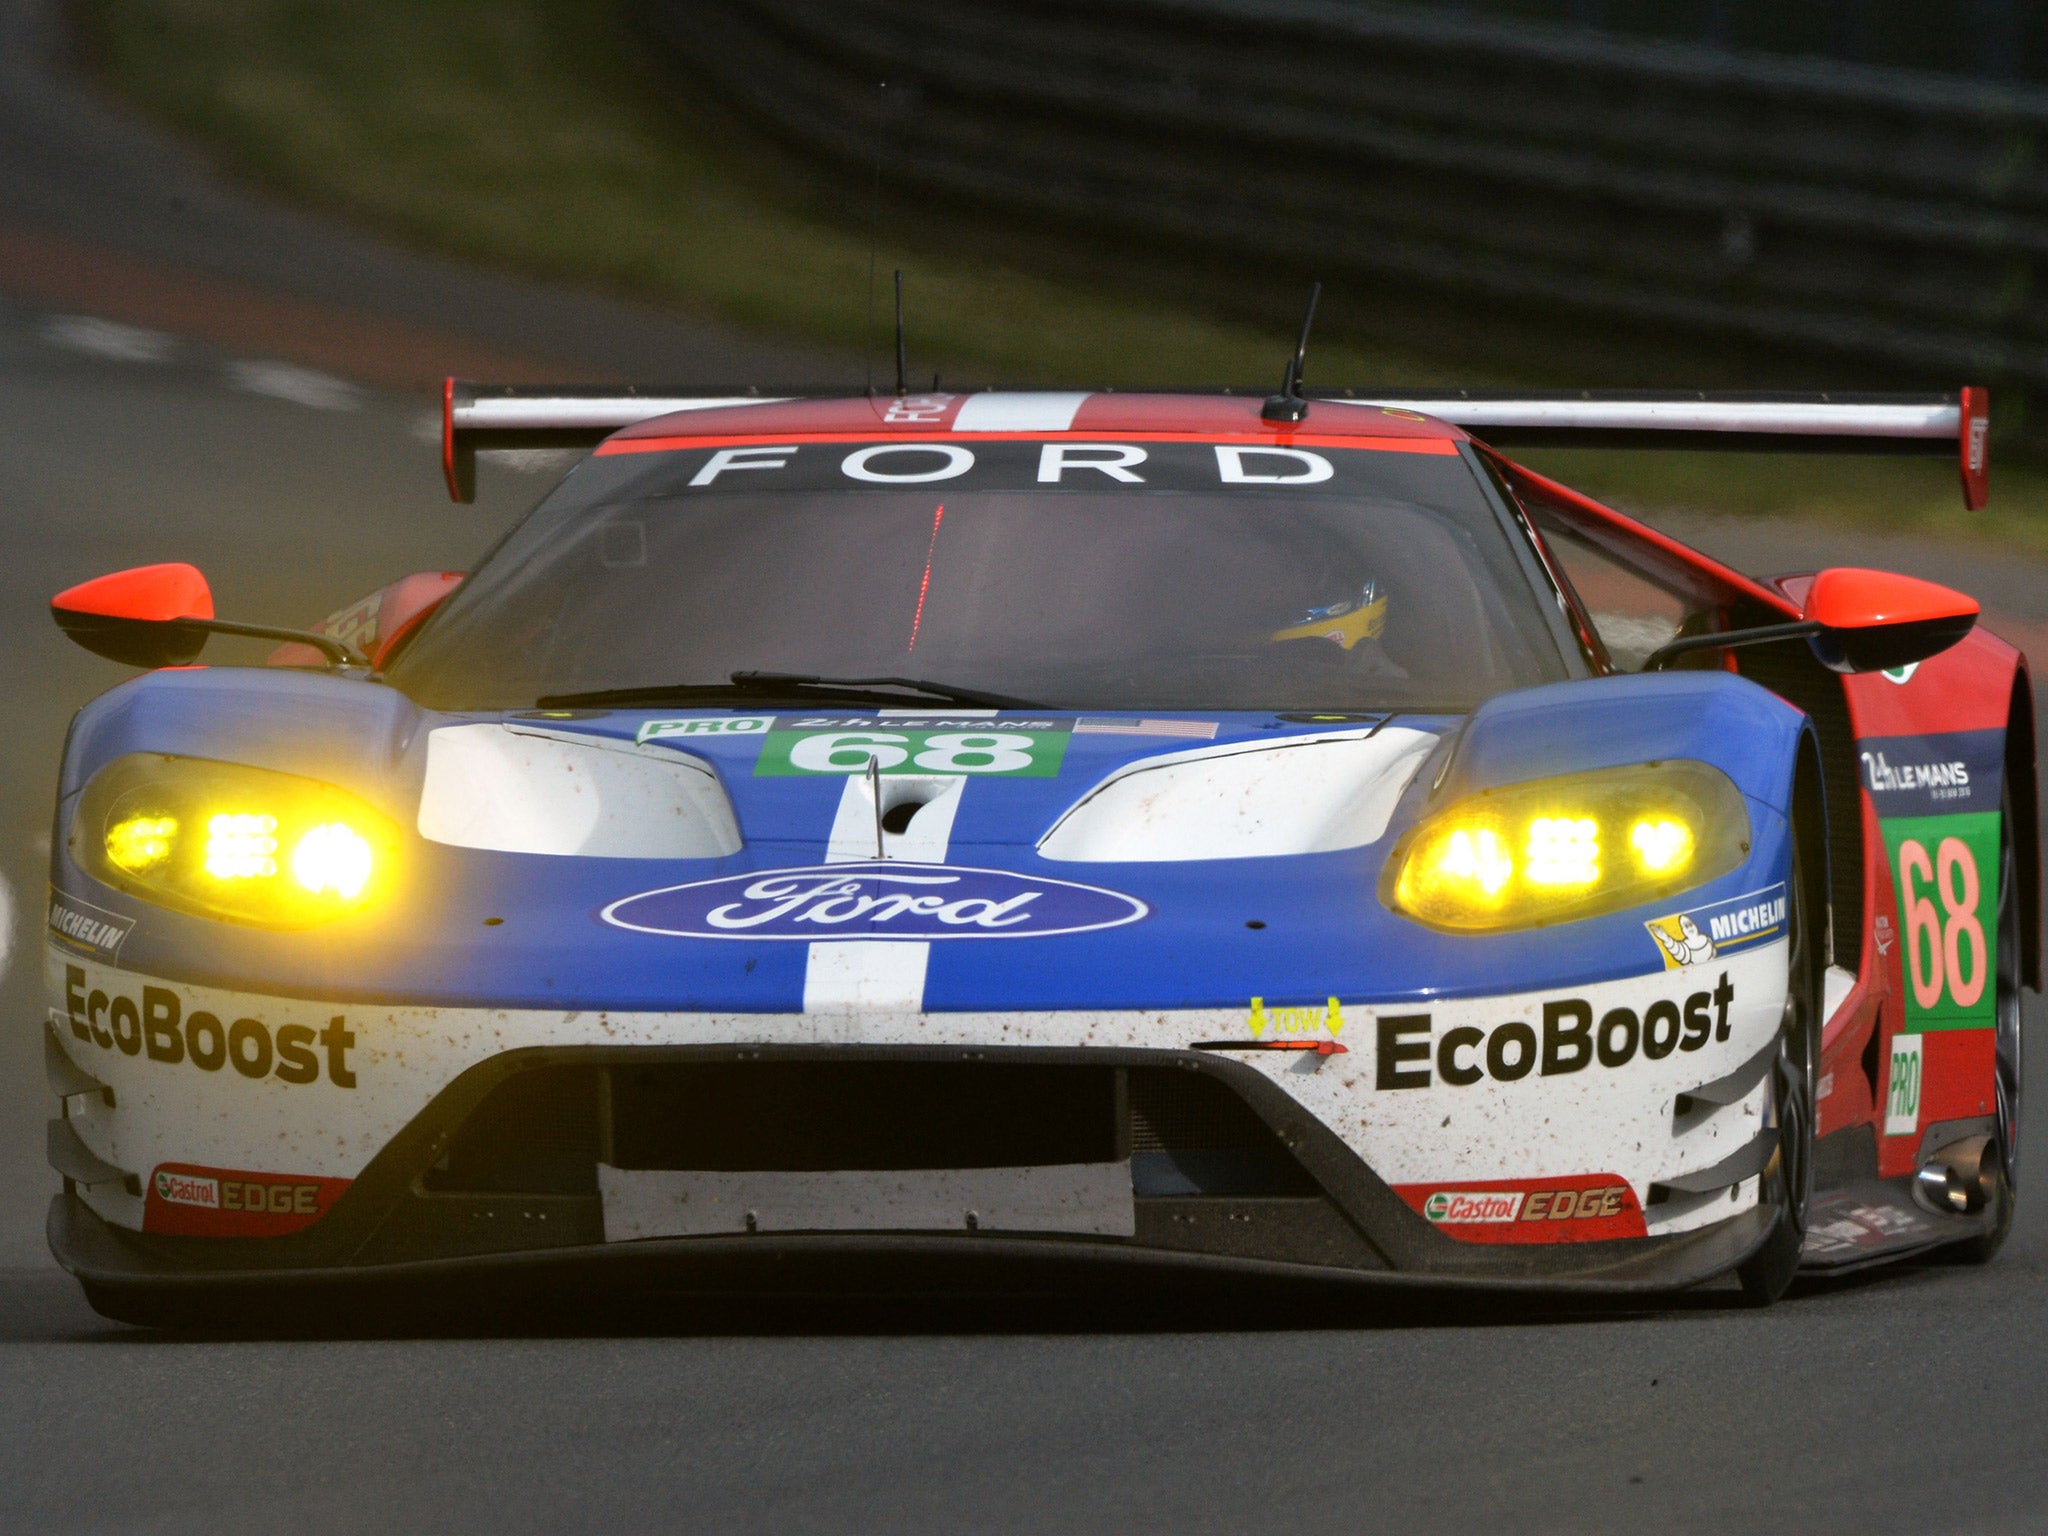 The No 68 Ford GT topped the timesheets after Wednesday's session